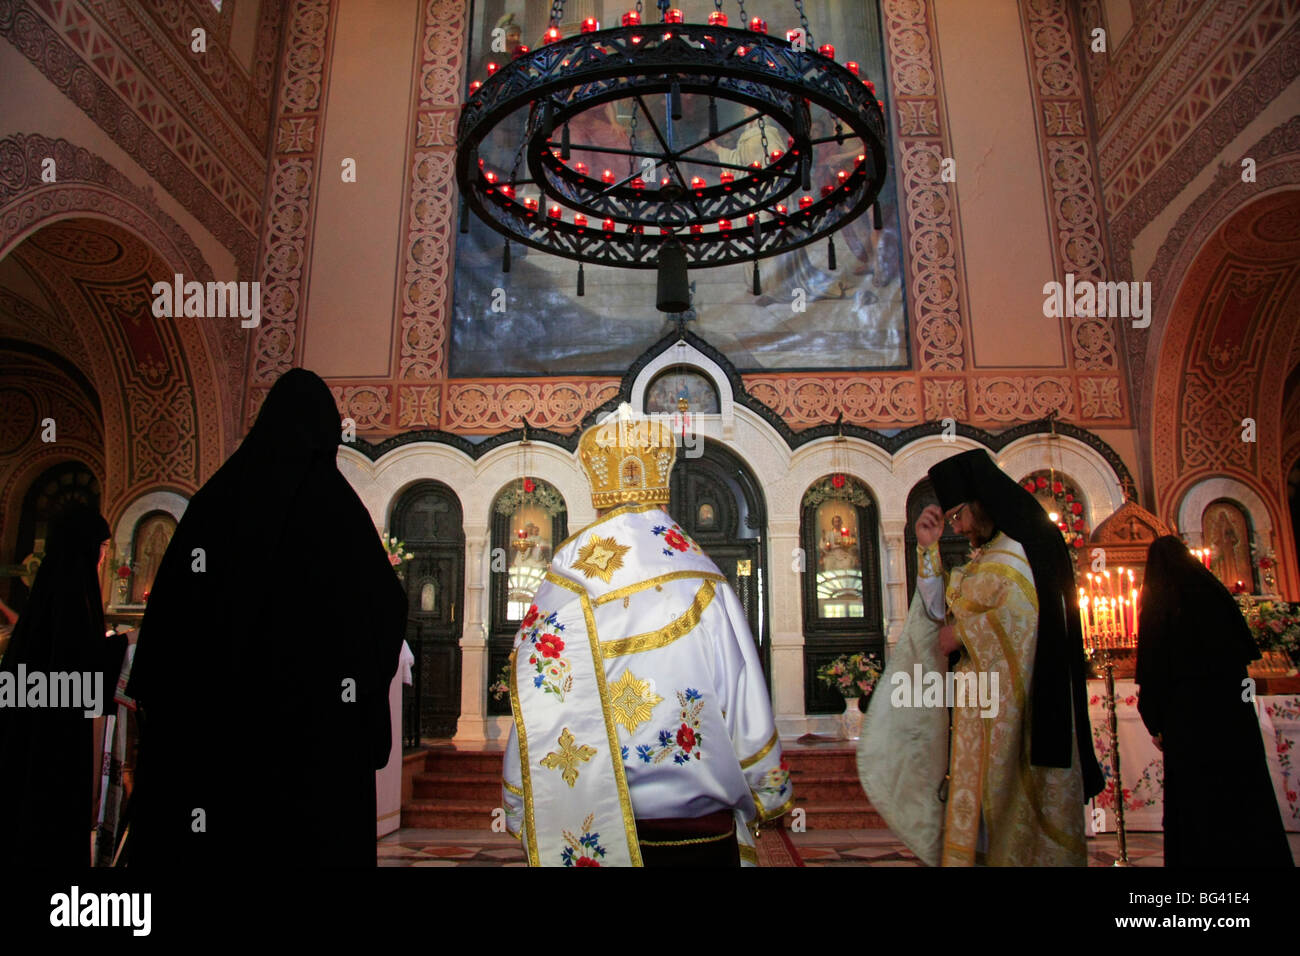 Israel, Jerusalem, the feast of Mary Magdalene at the Russian Orthodox Church of Mary Magdalene on the Mount of Olives Stock Photo